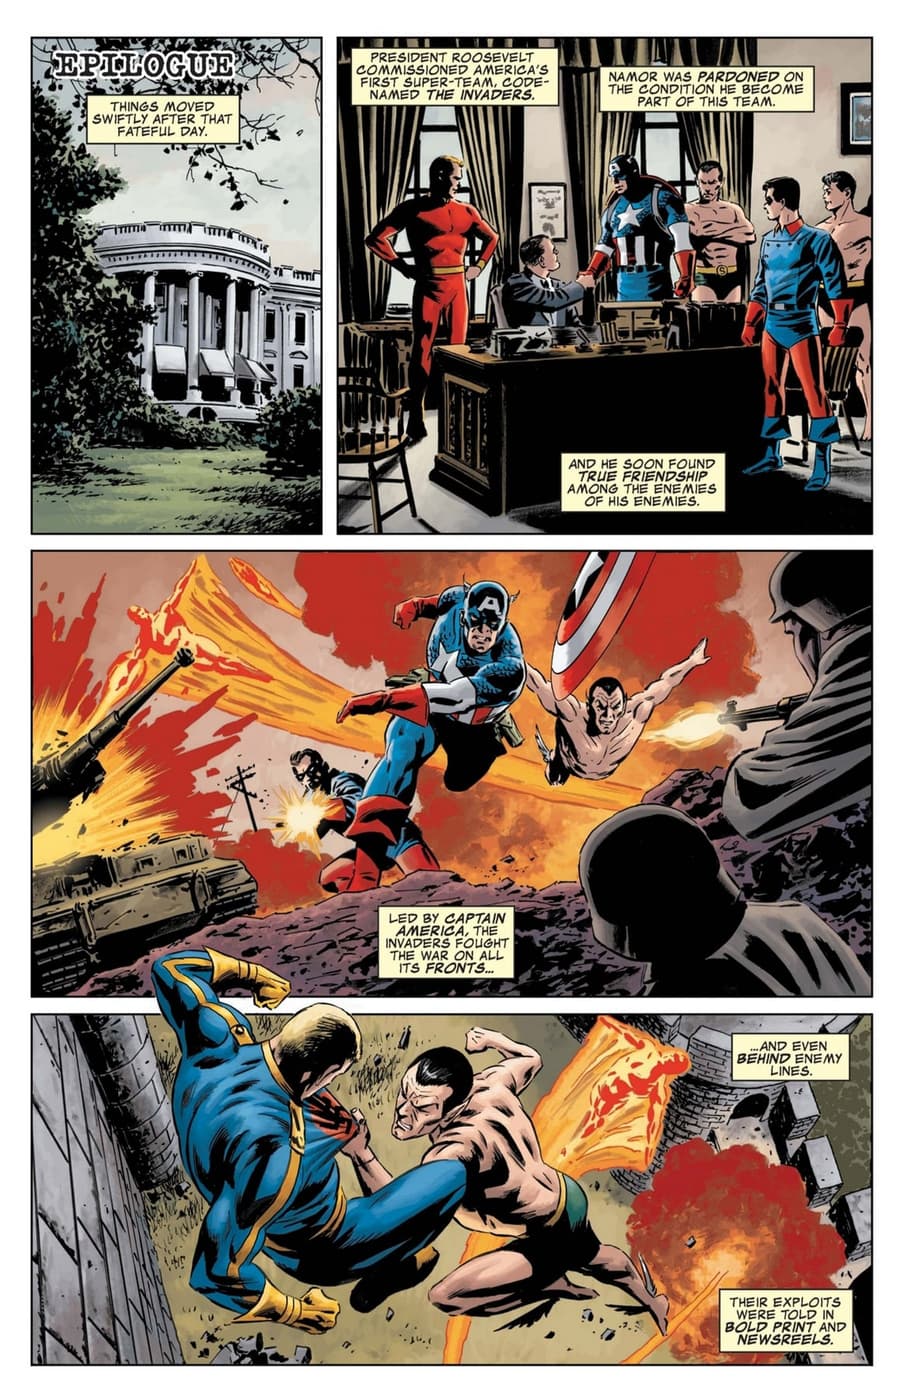 THE MARVELS PROJECT (2009) #8 page by Ed Brubaker and Steve Epting